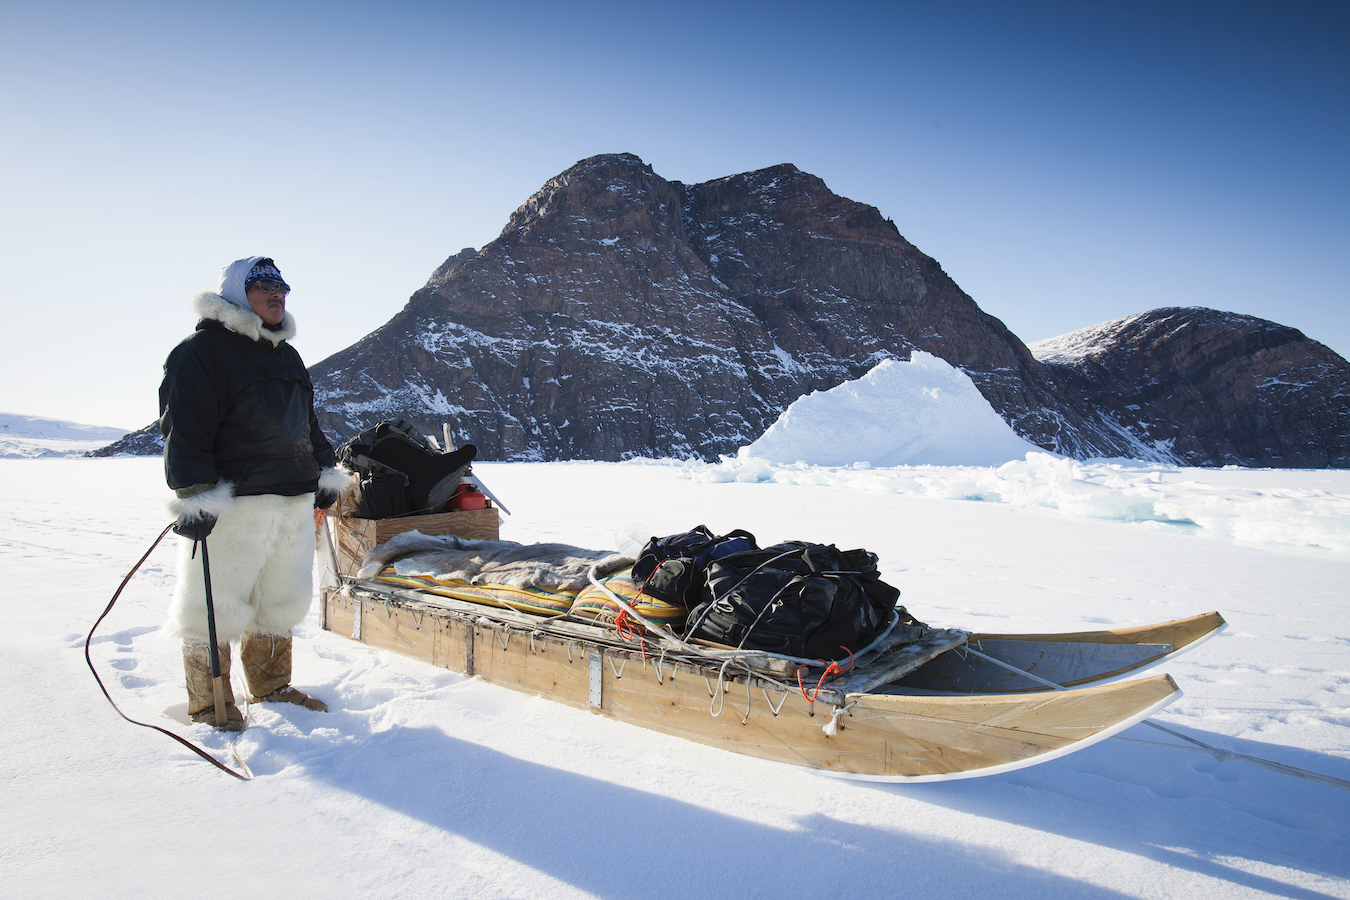 A man wearing fur clothes stands next to his dog sled on the sea ice with a rocky mountain in the background